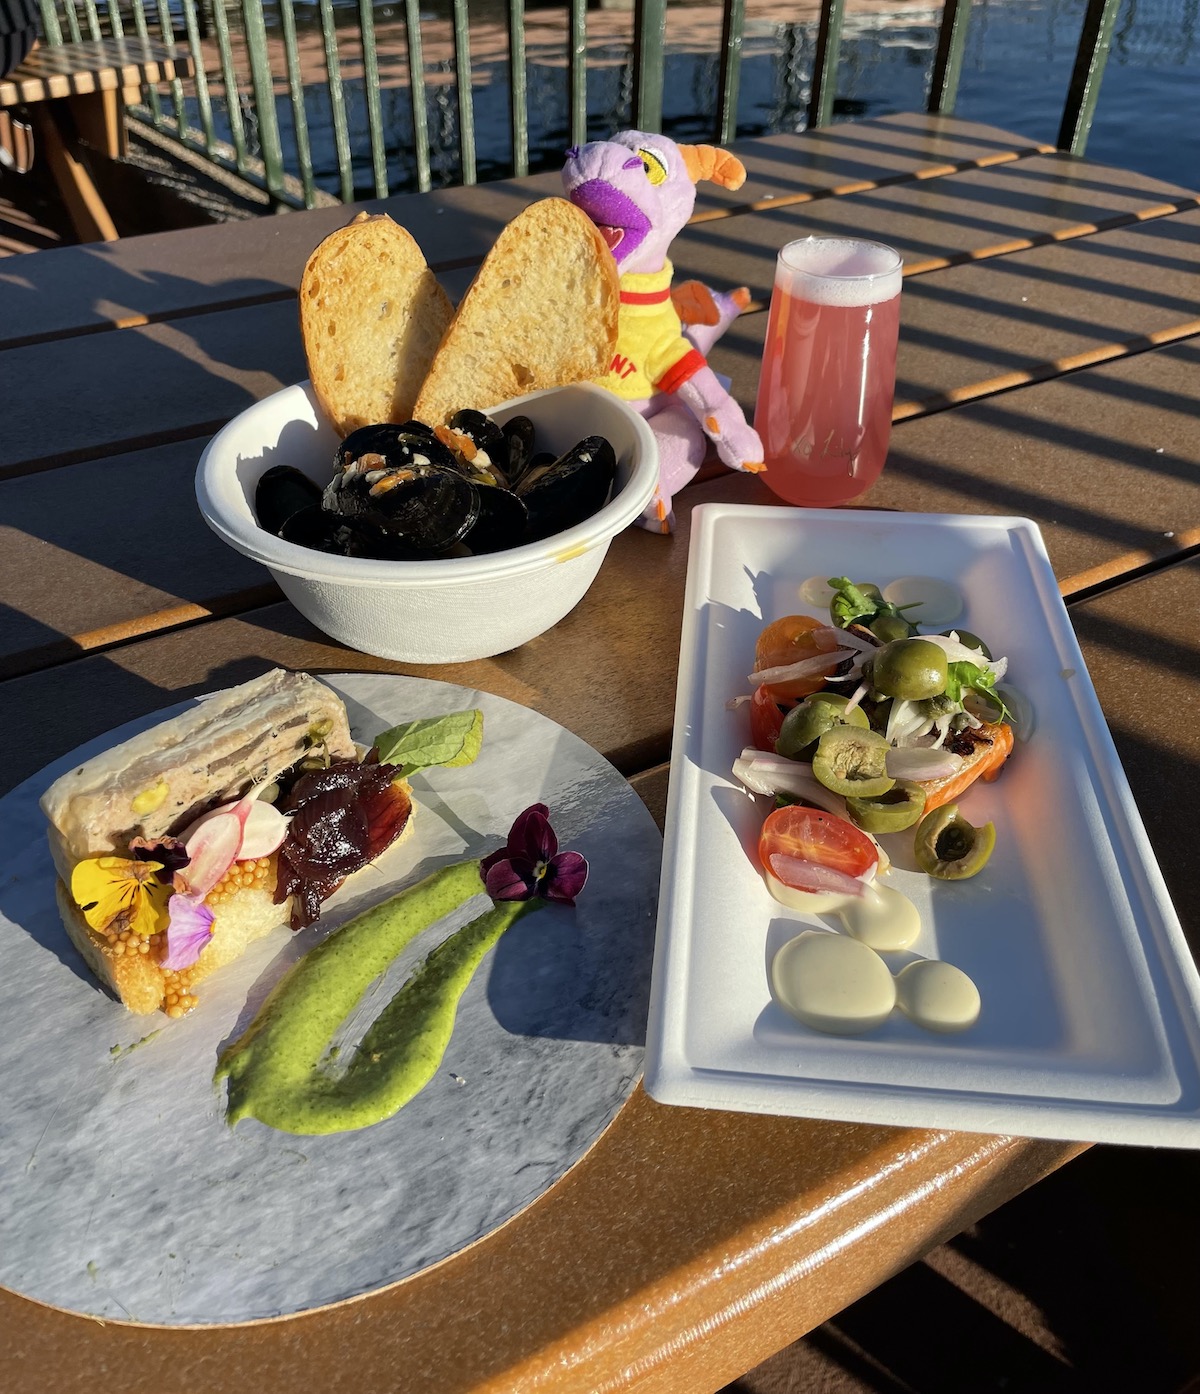 Mussels, pate, and trout at Epcot Festival of the Arts 2022.